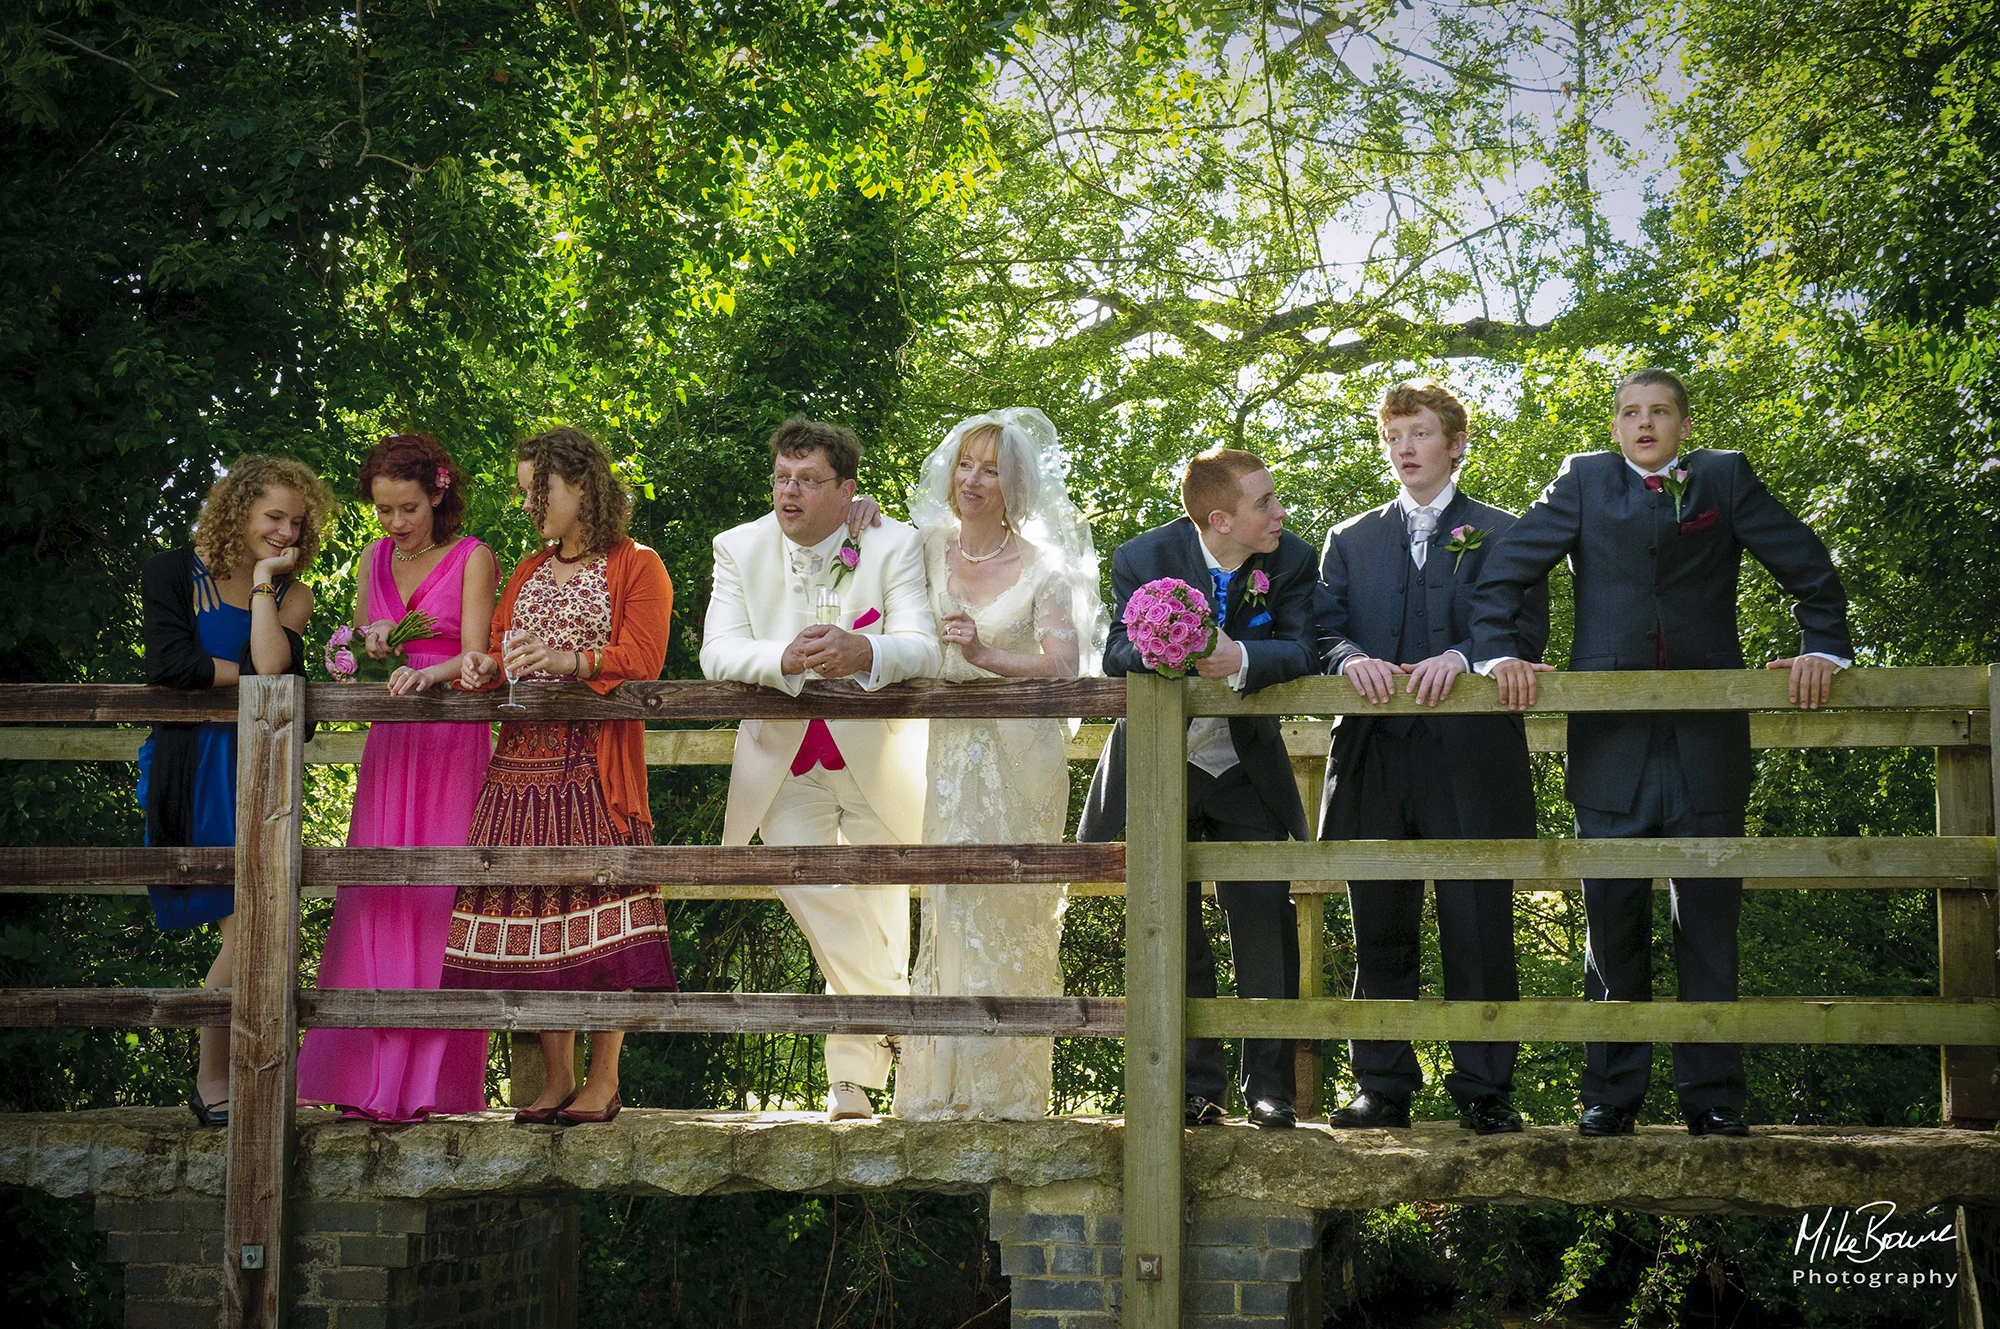 Wedding party chatting on a bridge in a forest